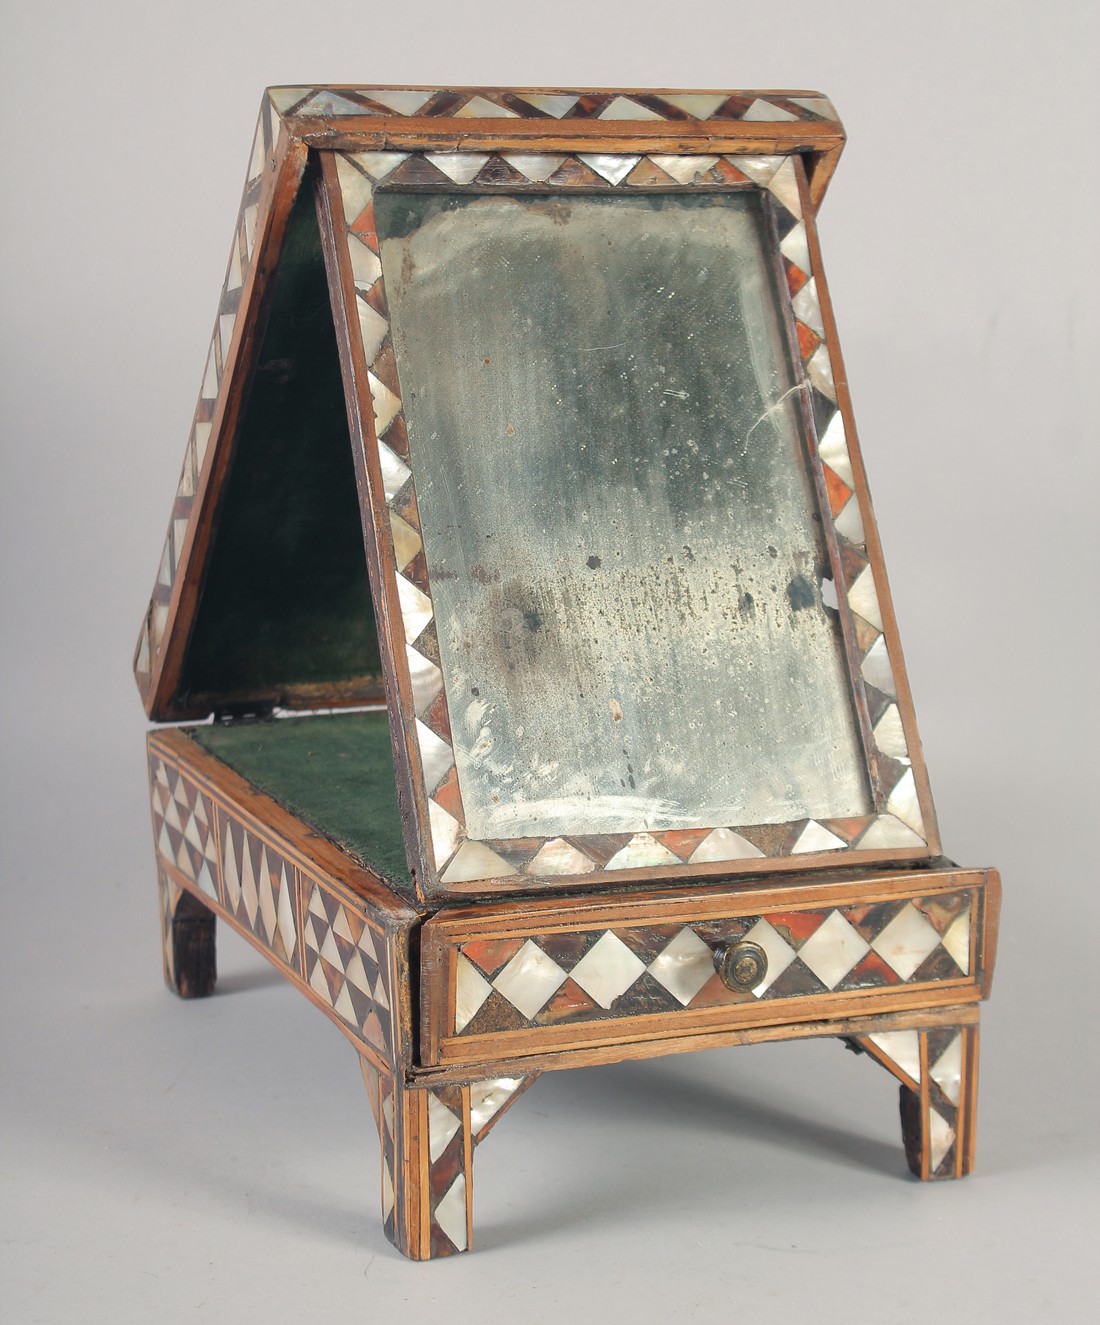 A 18TH CENTURY OTTOMAN MOTHER OF PEARL INLAID WOODEN MIRROR BOX, further inlaid with - Image 4 of 4